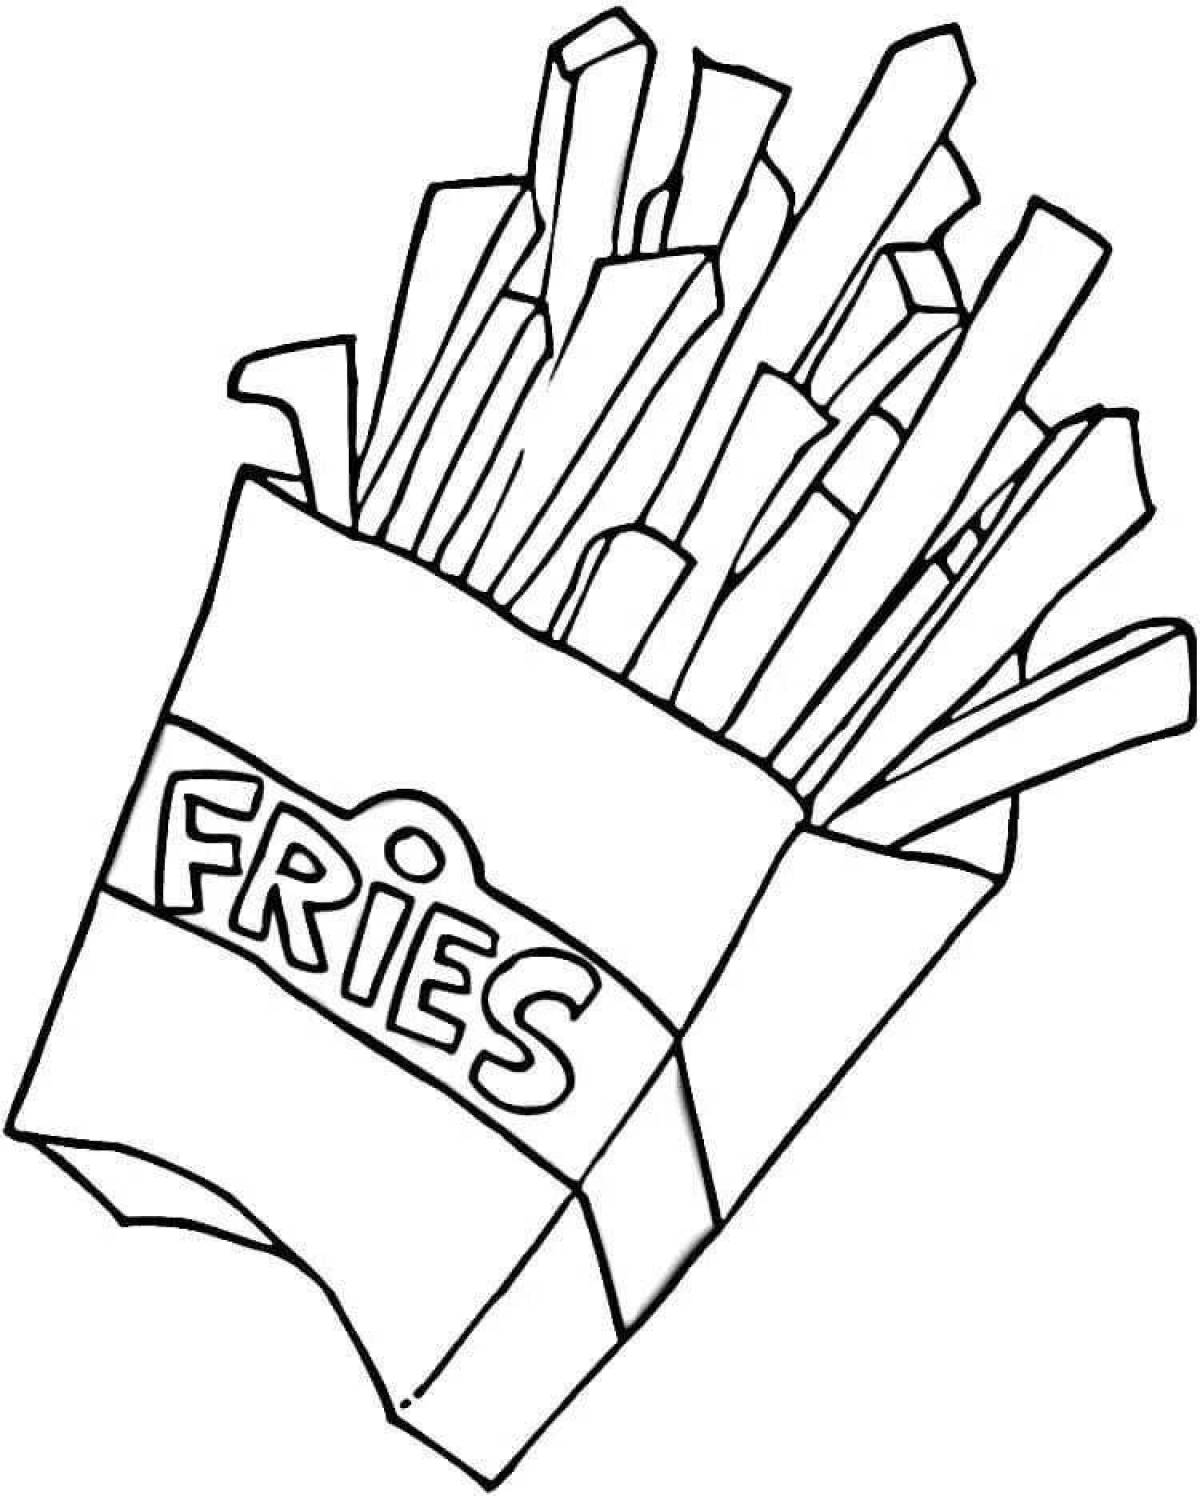 Spicy french fries coloring page